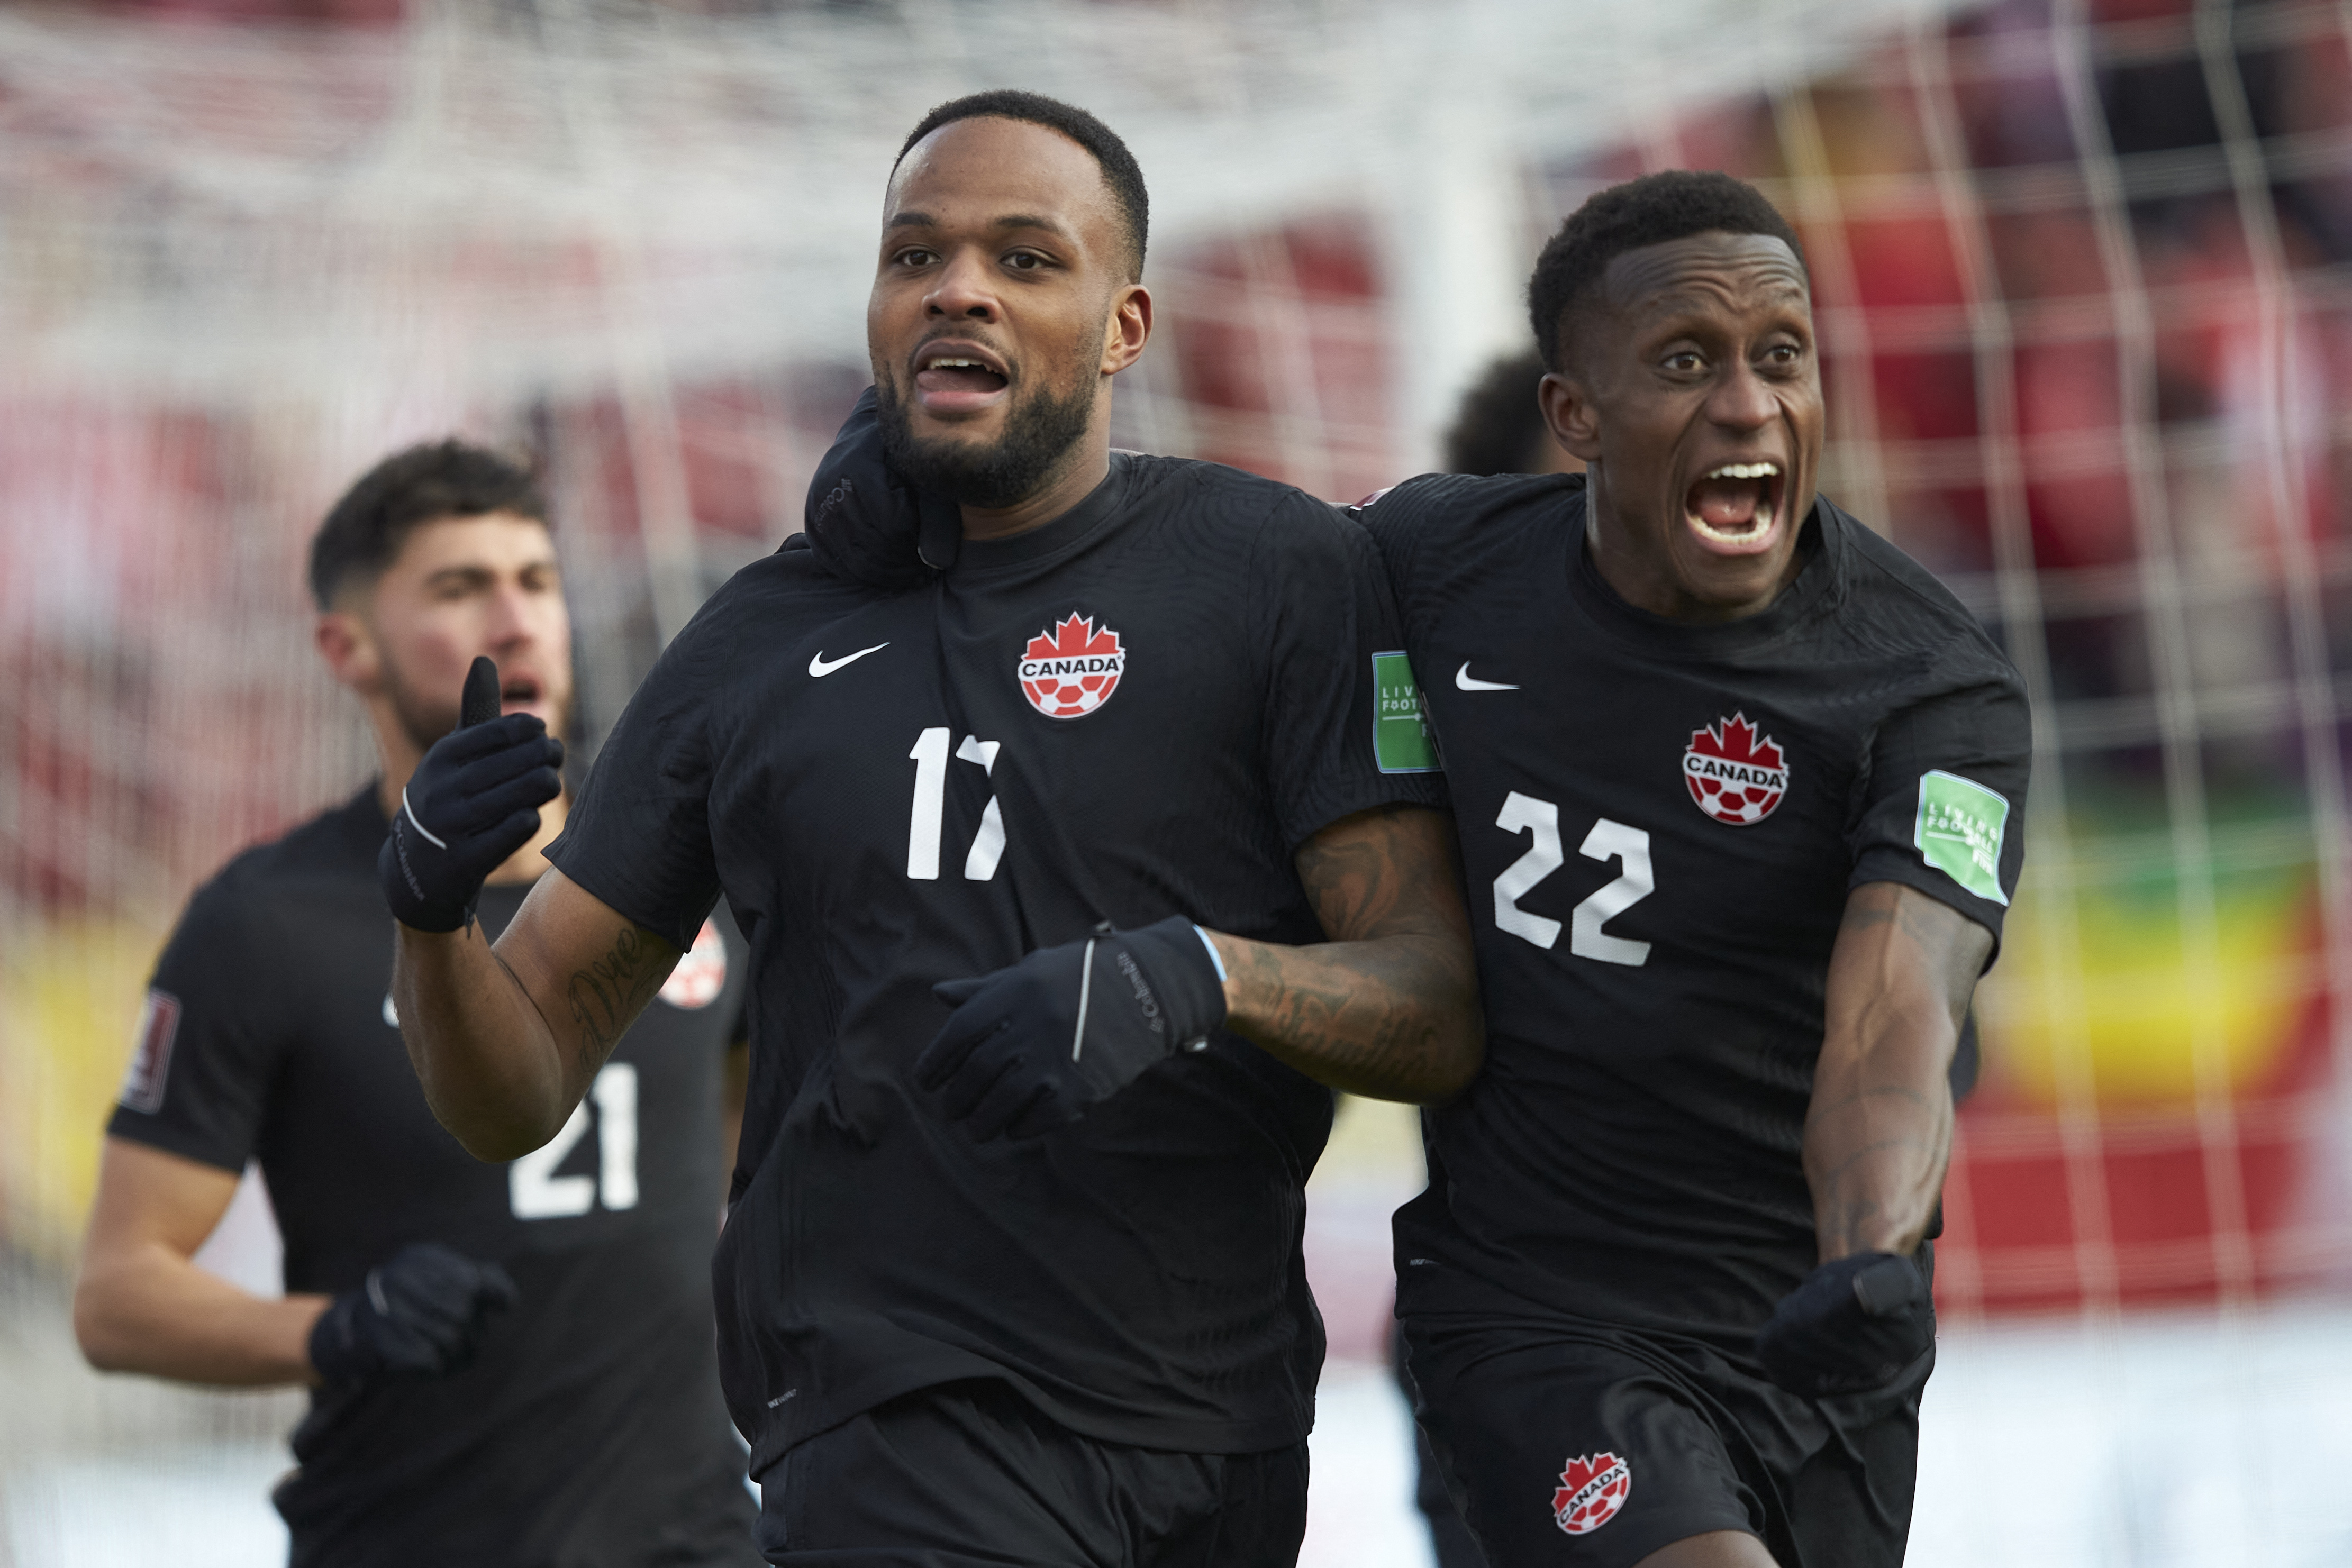 Canada Beats U.S., Cementing a Soccer Power Shift - The New York Times